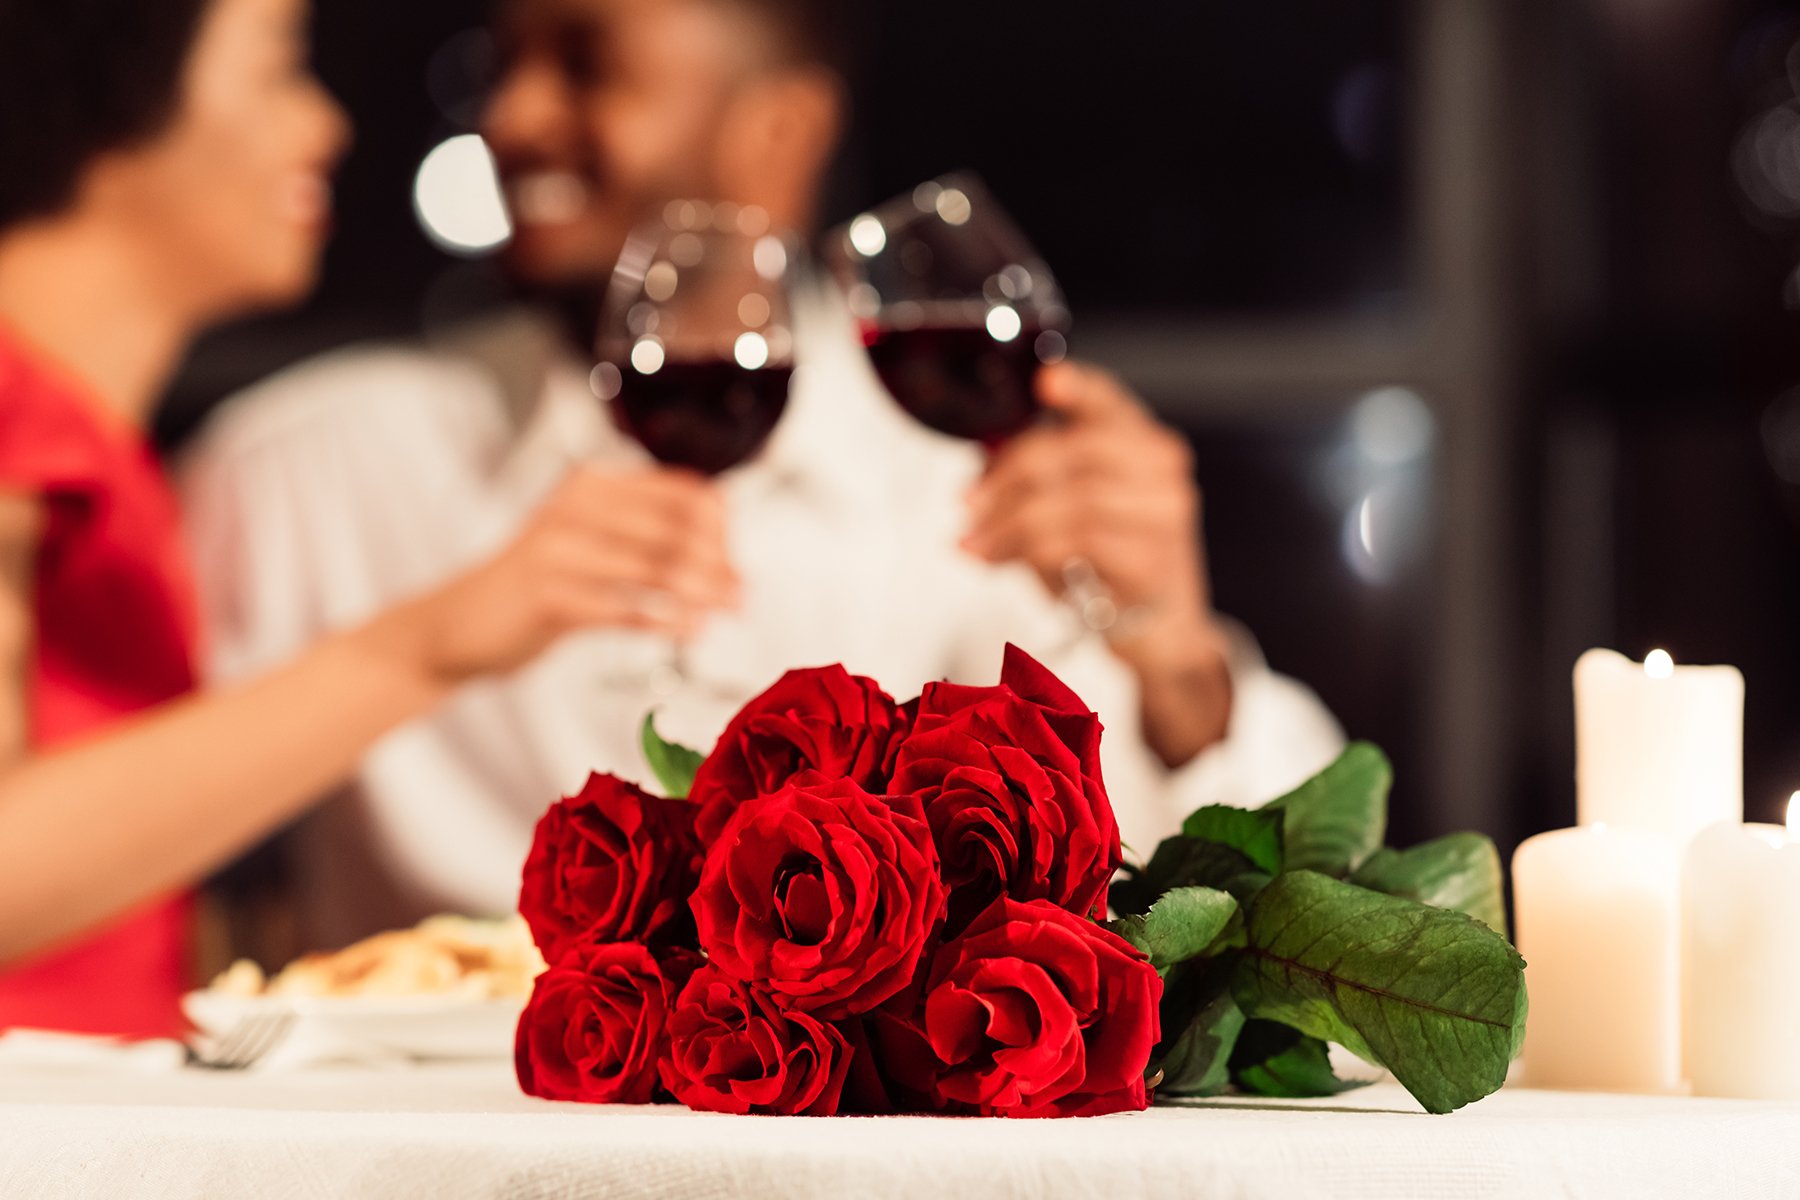 Roses on a table with blurred couple in the background having dinner at a restaurant